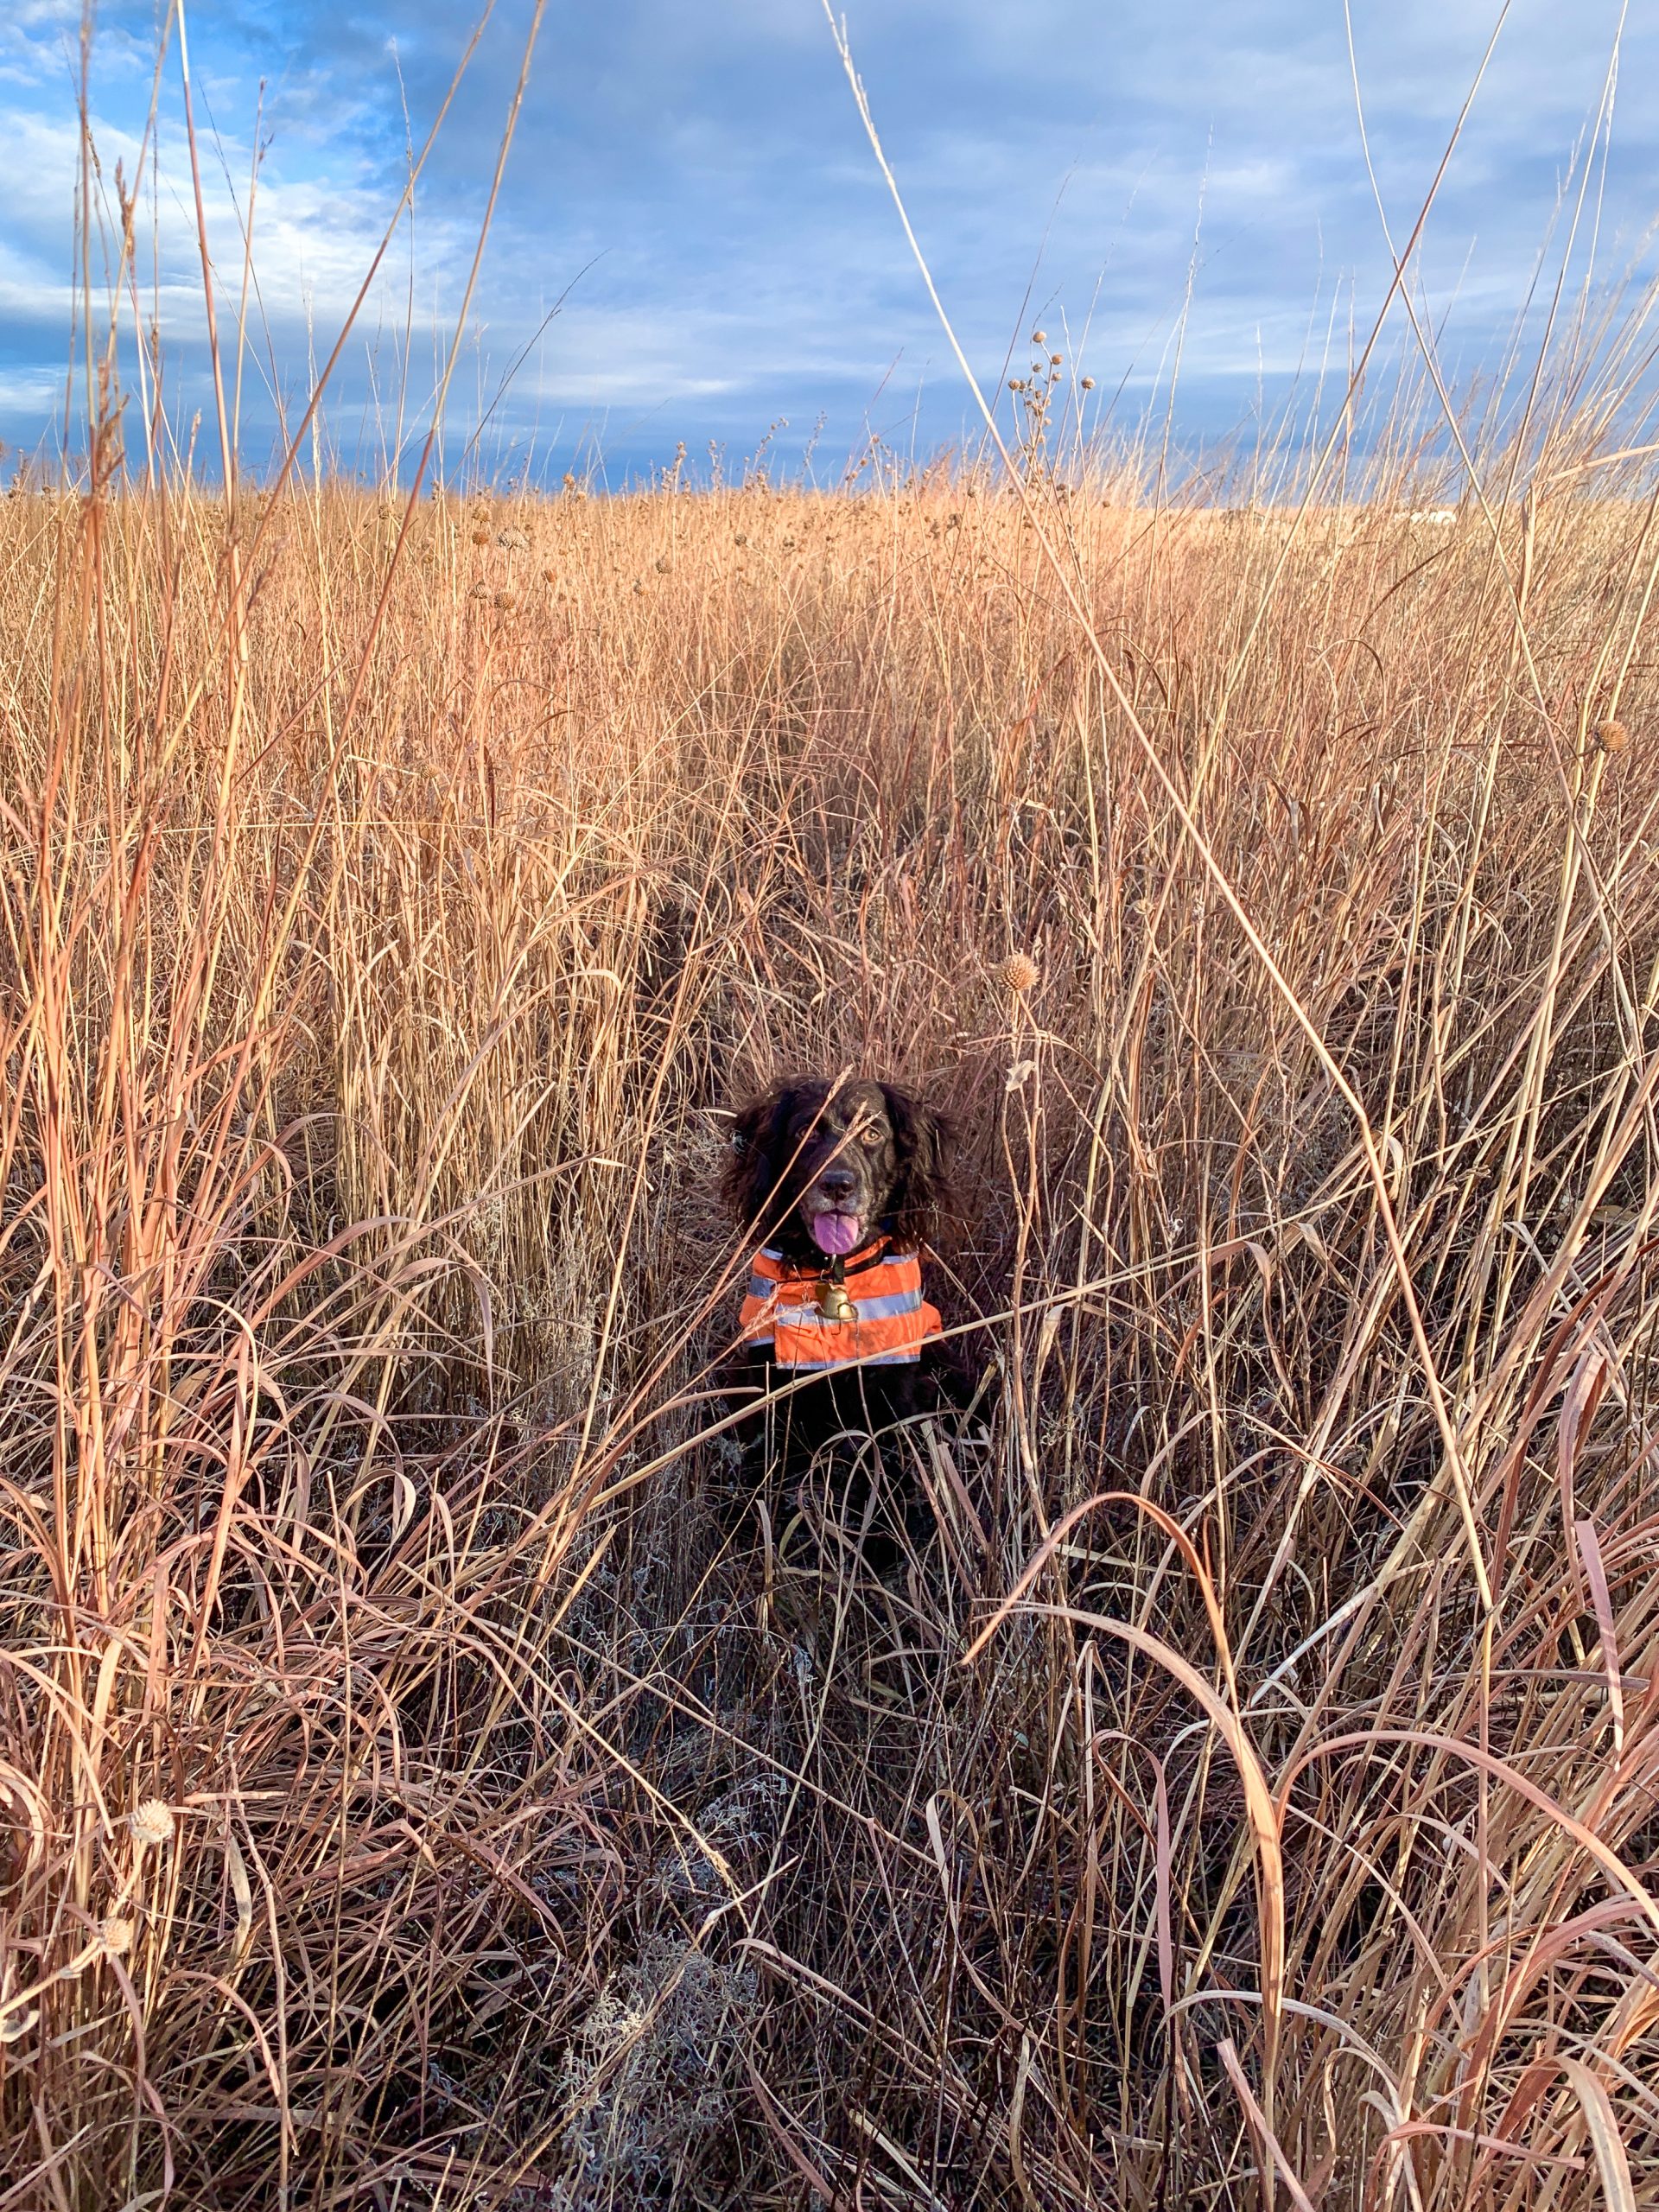 Sarah Nell Blackwell’s Boykin spaniel, Samson, in a thick field of native grass and brush waiting for the go ahead.
